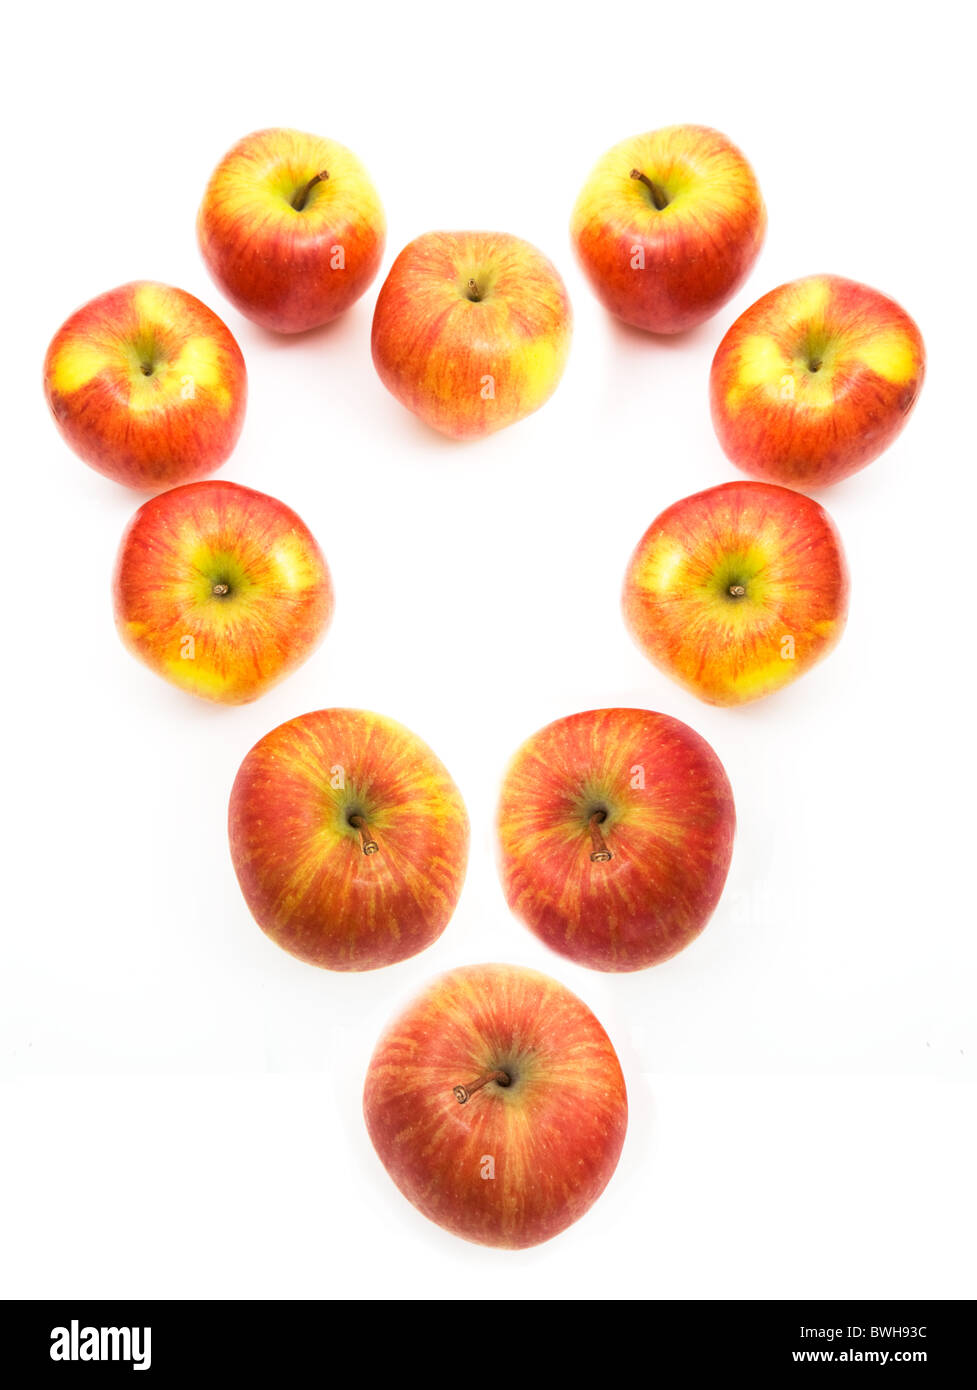 Apples formed into Heart Shape - A Healthy Diet Stock Photo